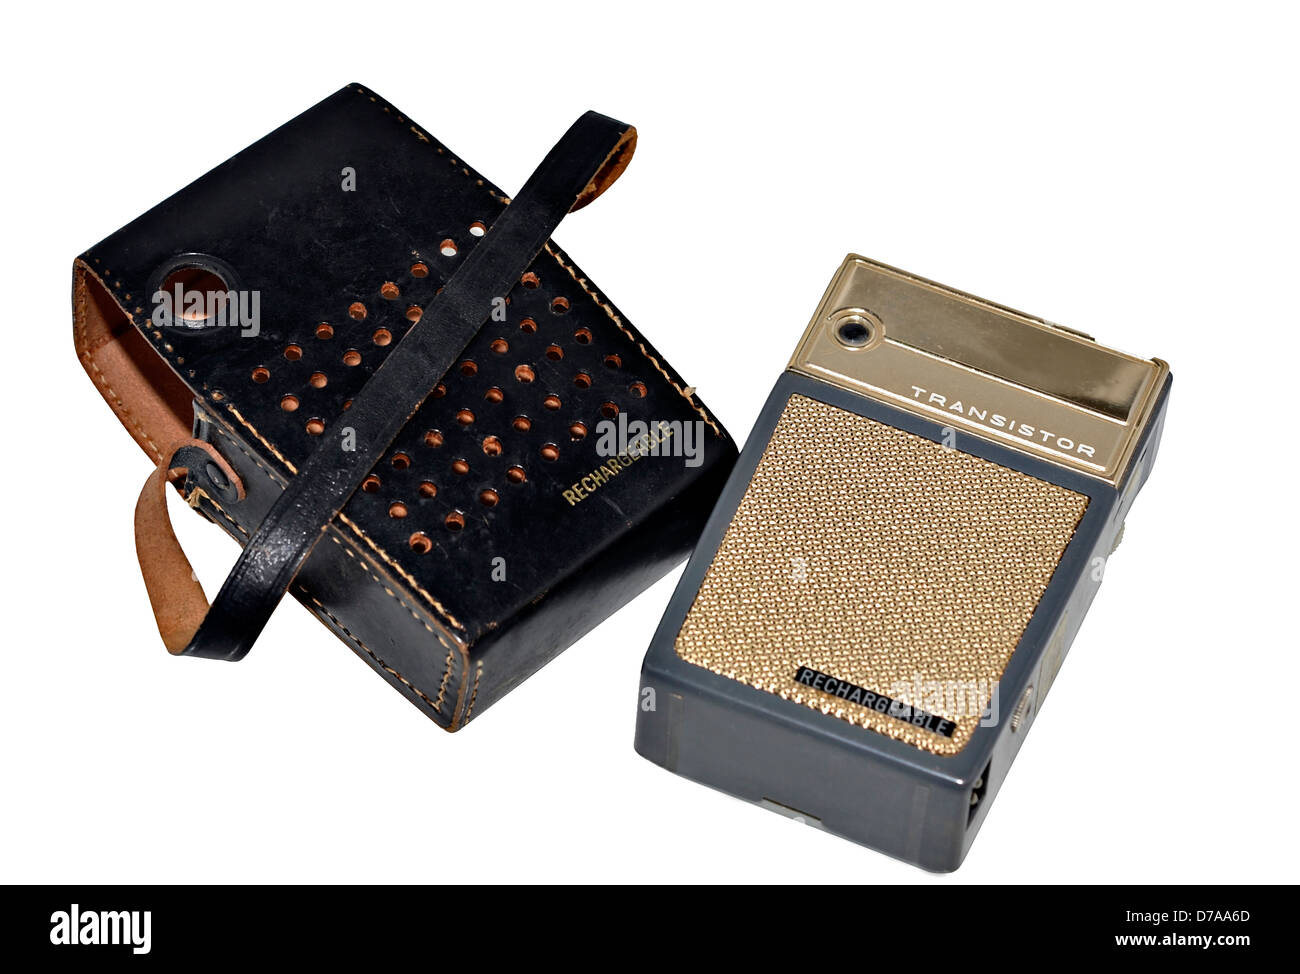 An old transistor radio with leather case. Stock Photo